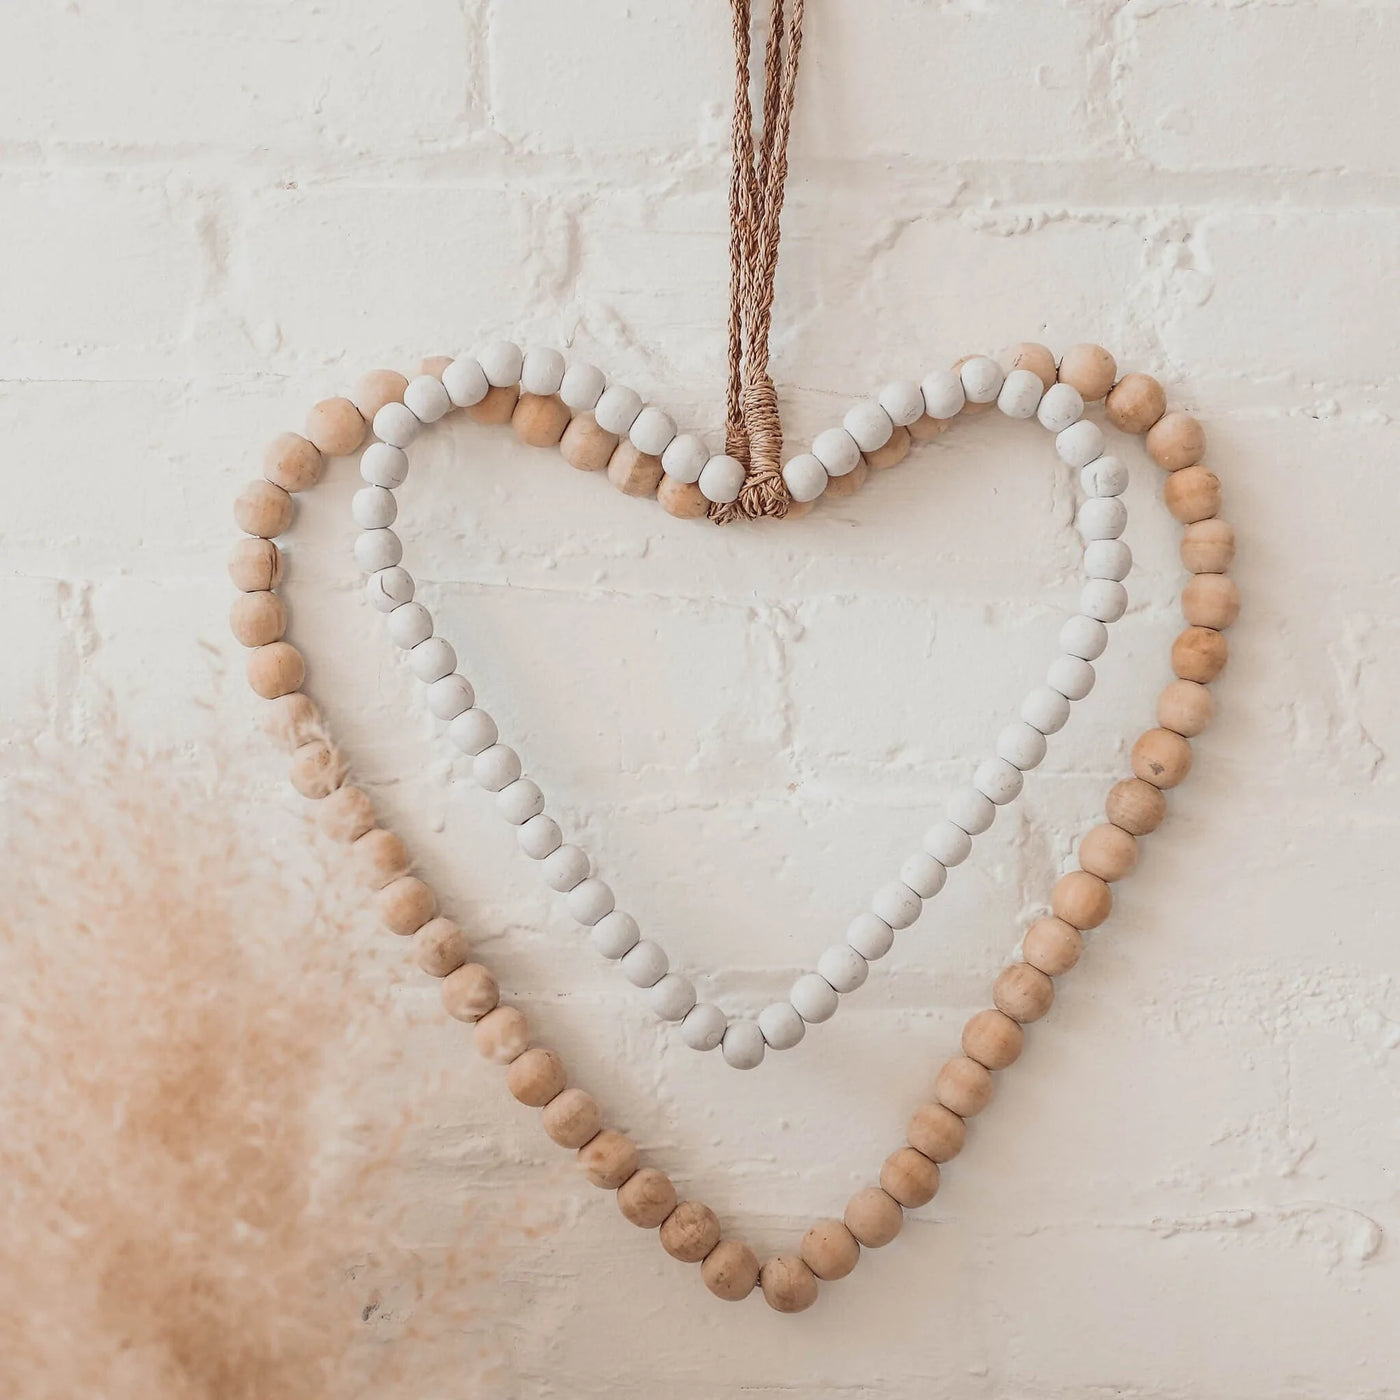 Beaded Heart - Large Natural